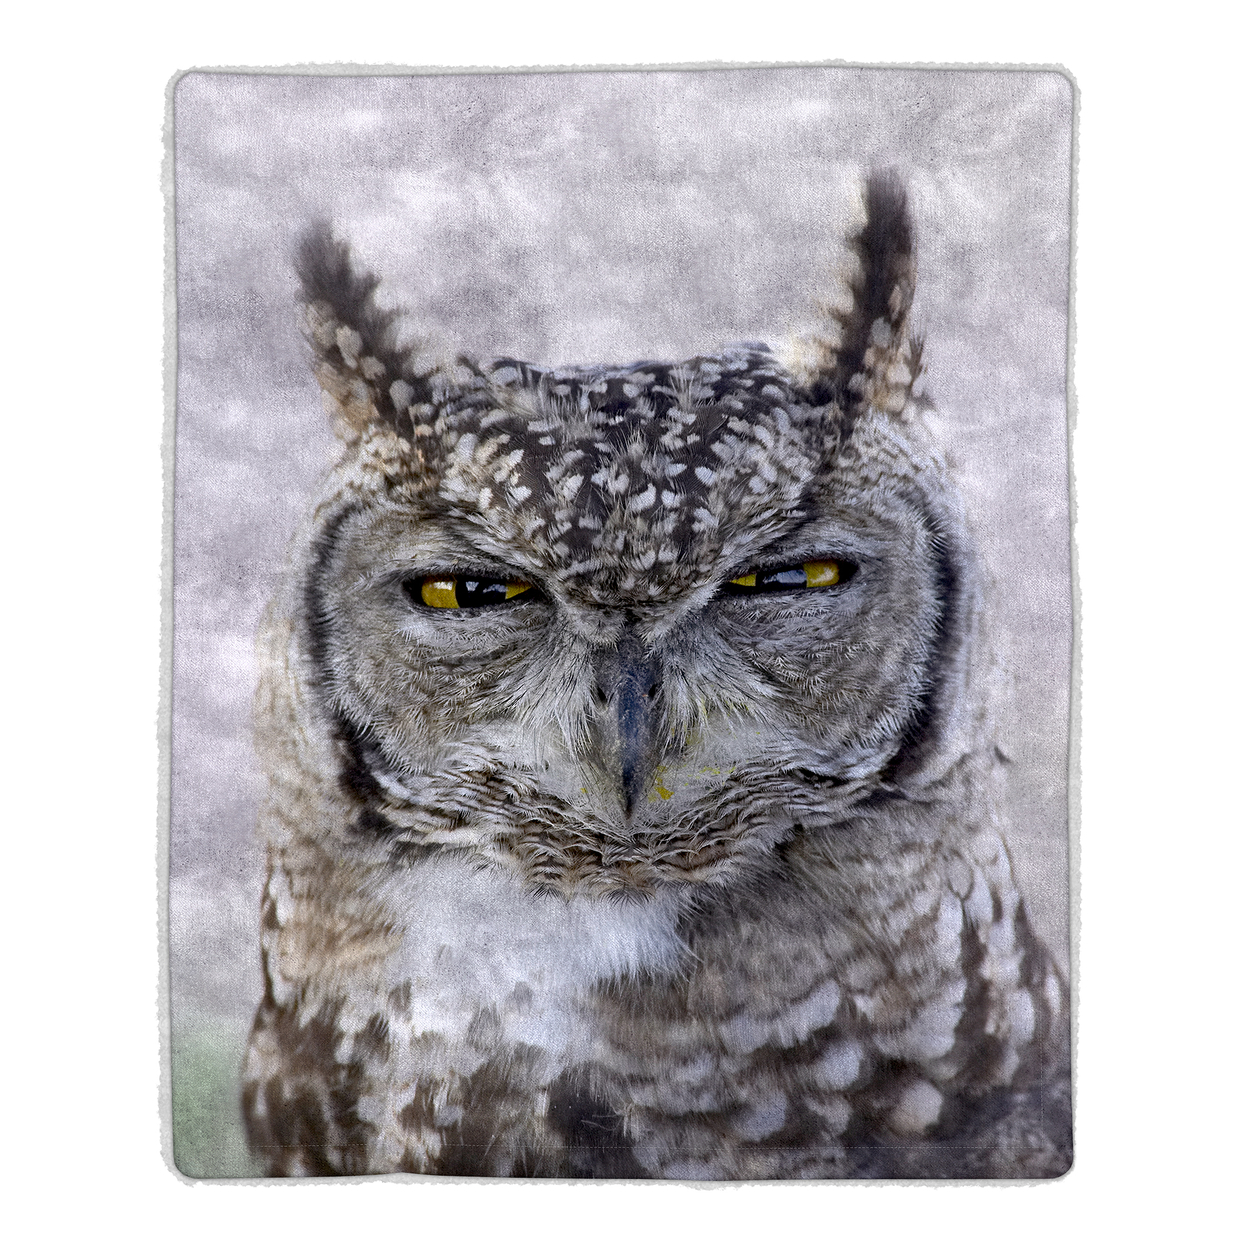 Sherpa Fleece Throw Blanket- Owl Print Lightweight Bed Or Couch Soft Snuggly